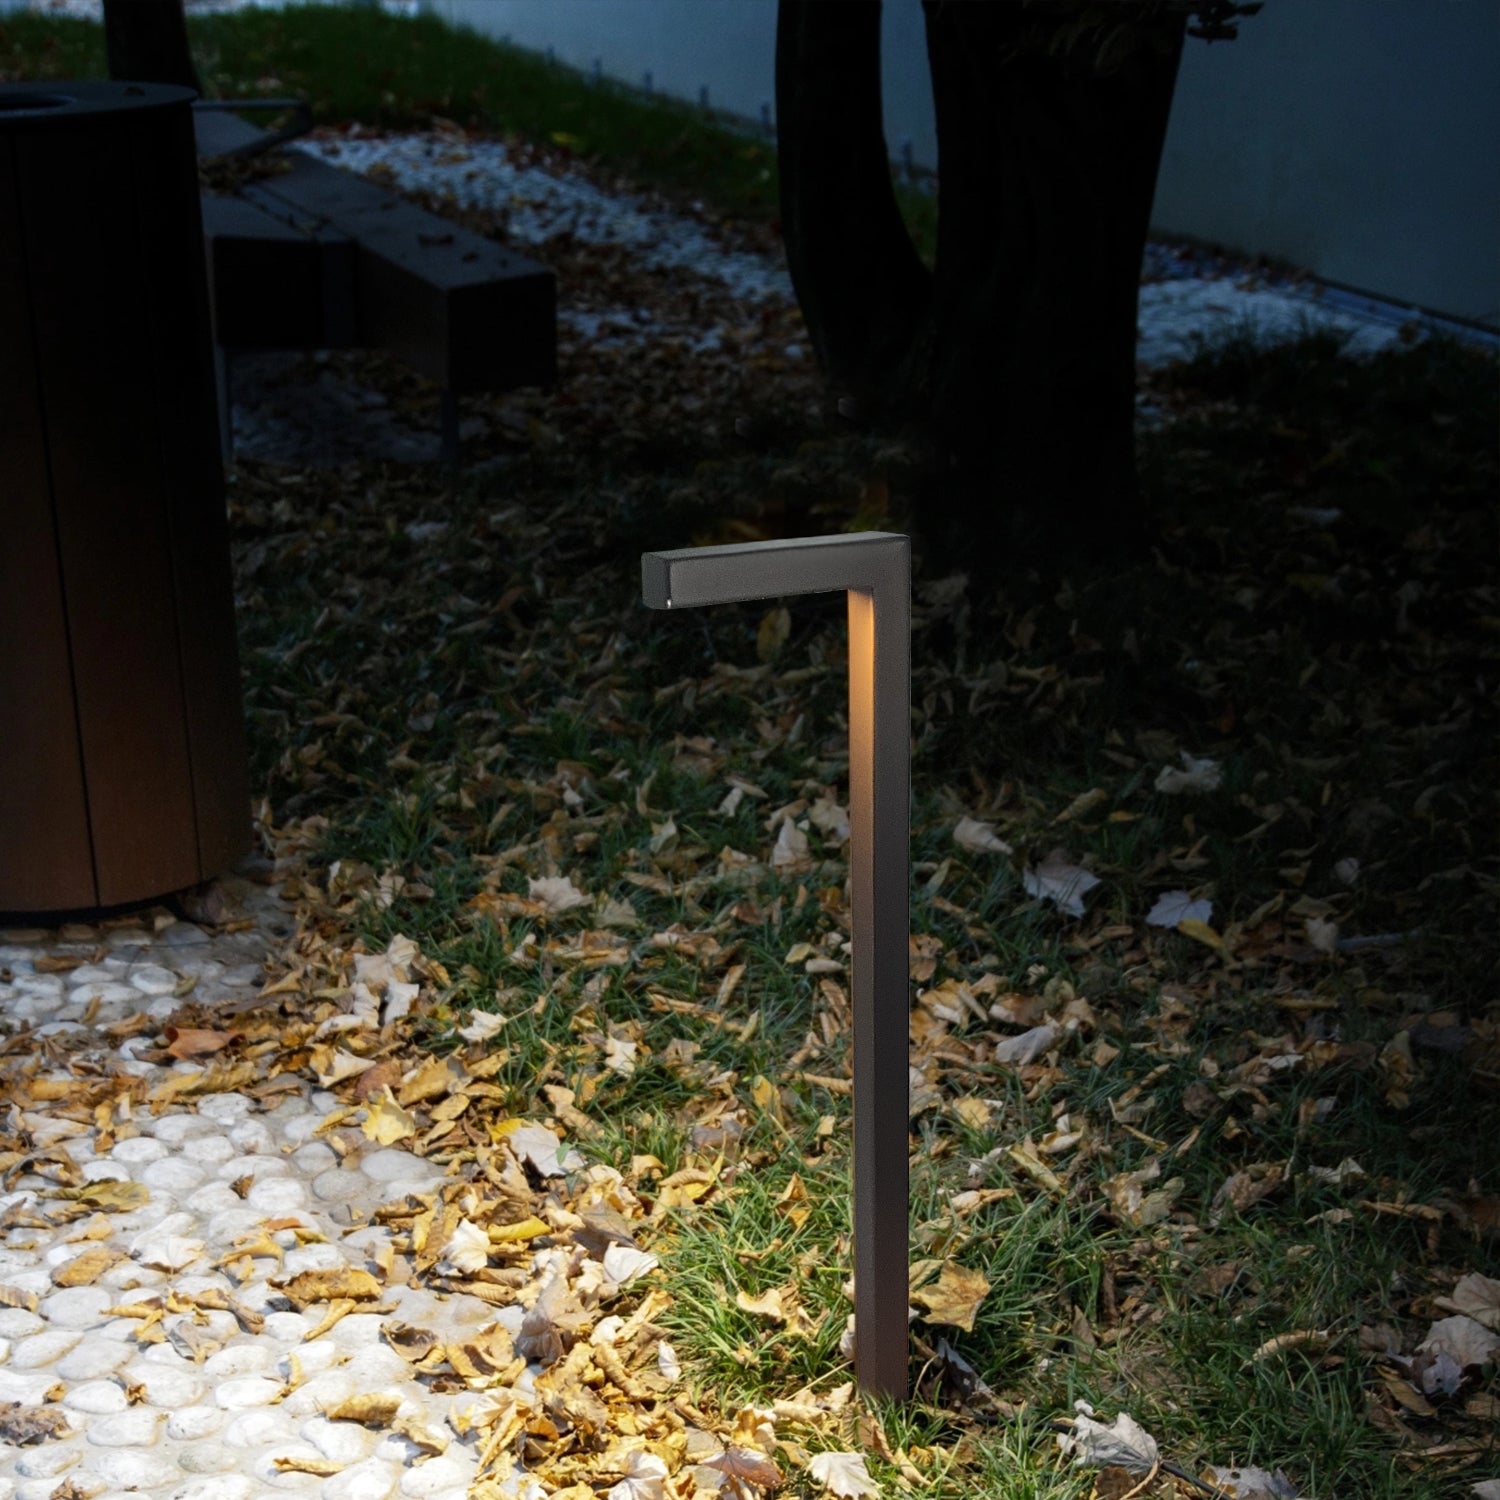 L-shaped low voltage brass path light illuminating garden walkway with fallen leaves, featured in serene outdoor setting at night